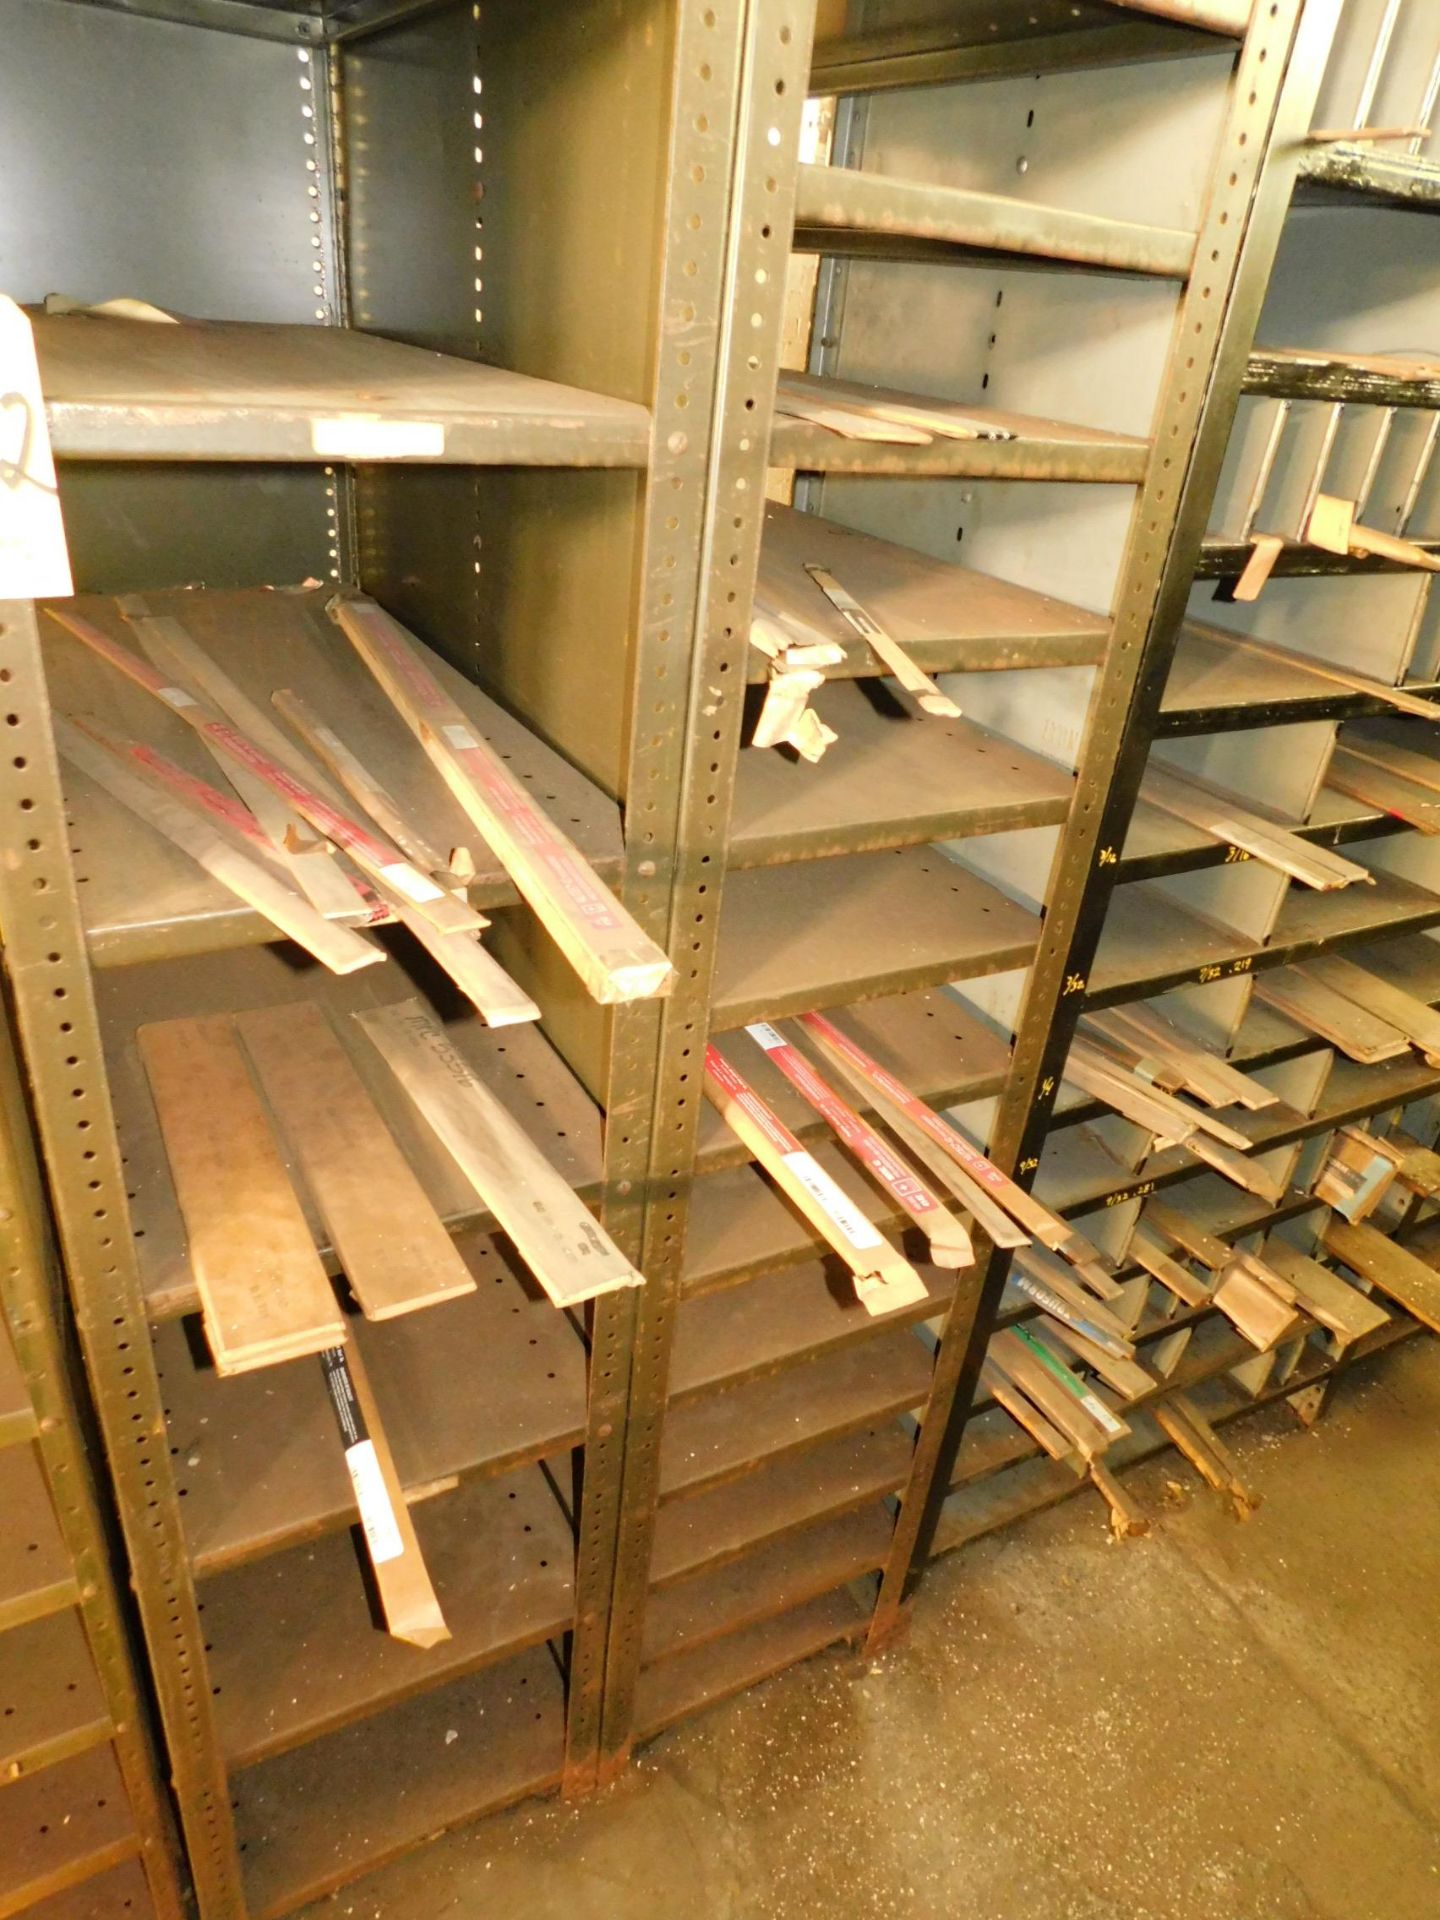 Contents of Precision Ground Stock on (8) Sections of Shelving - Image 2 of 8